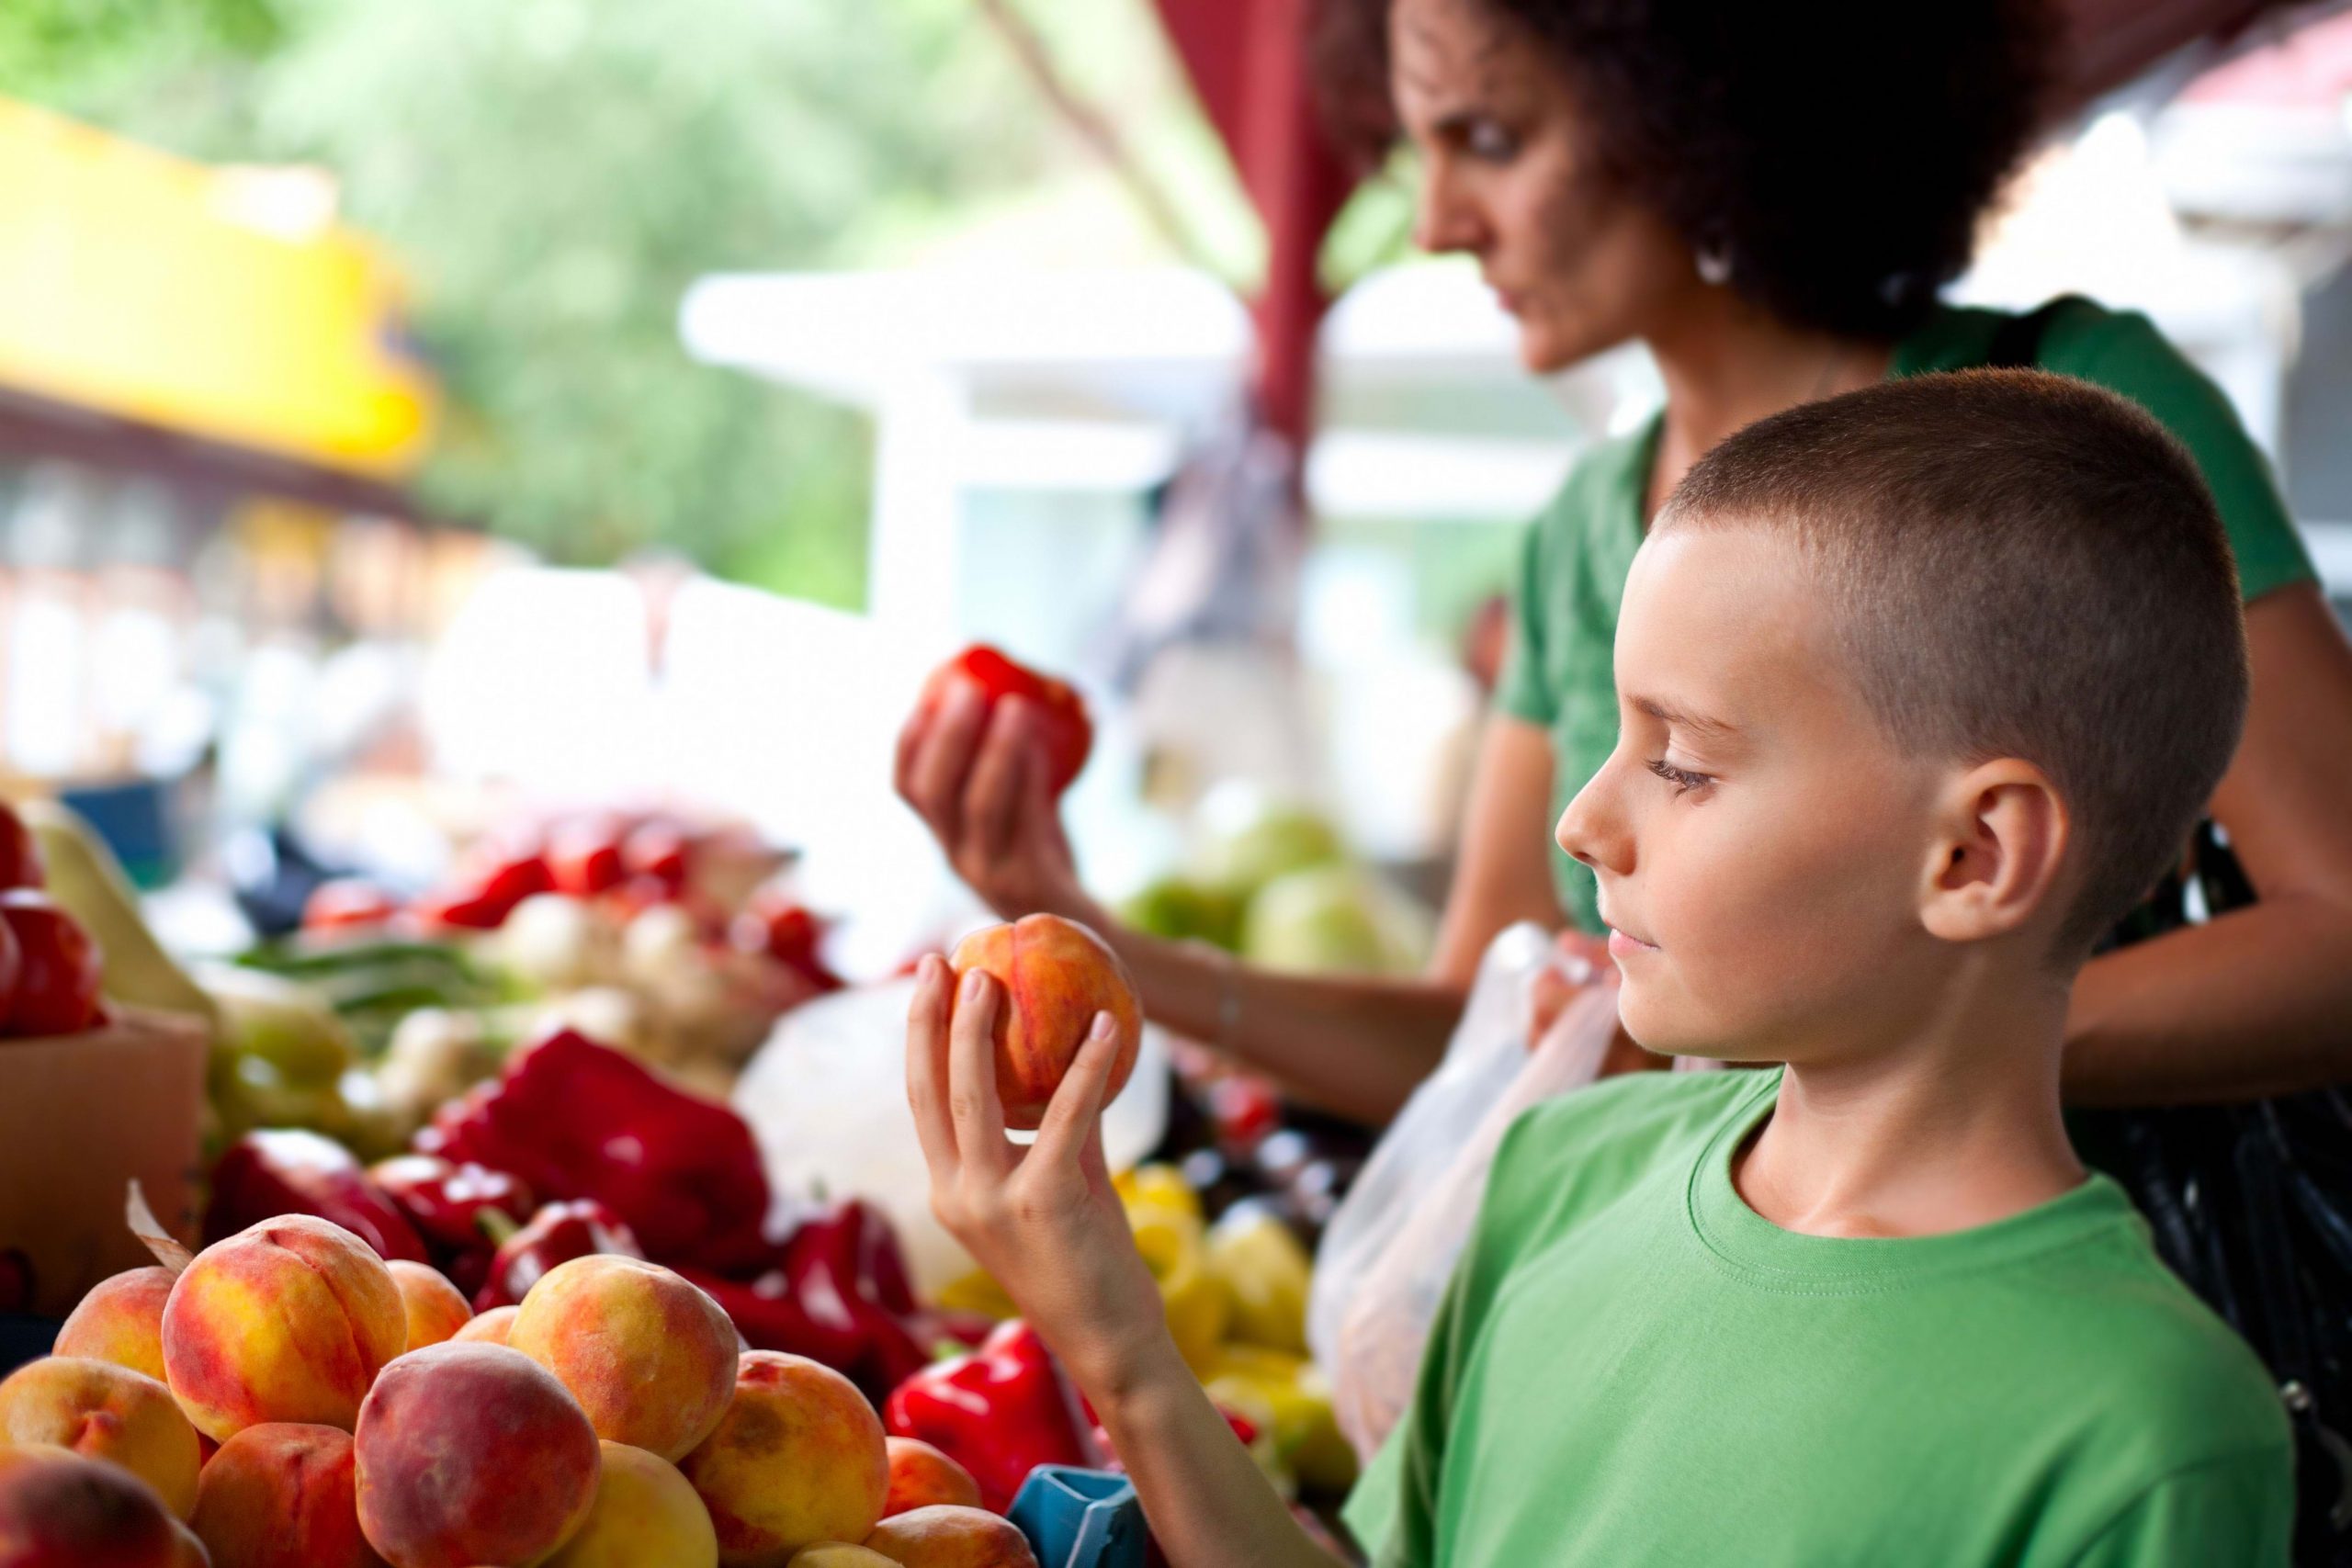 Family activities: Visit the local farmers markets